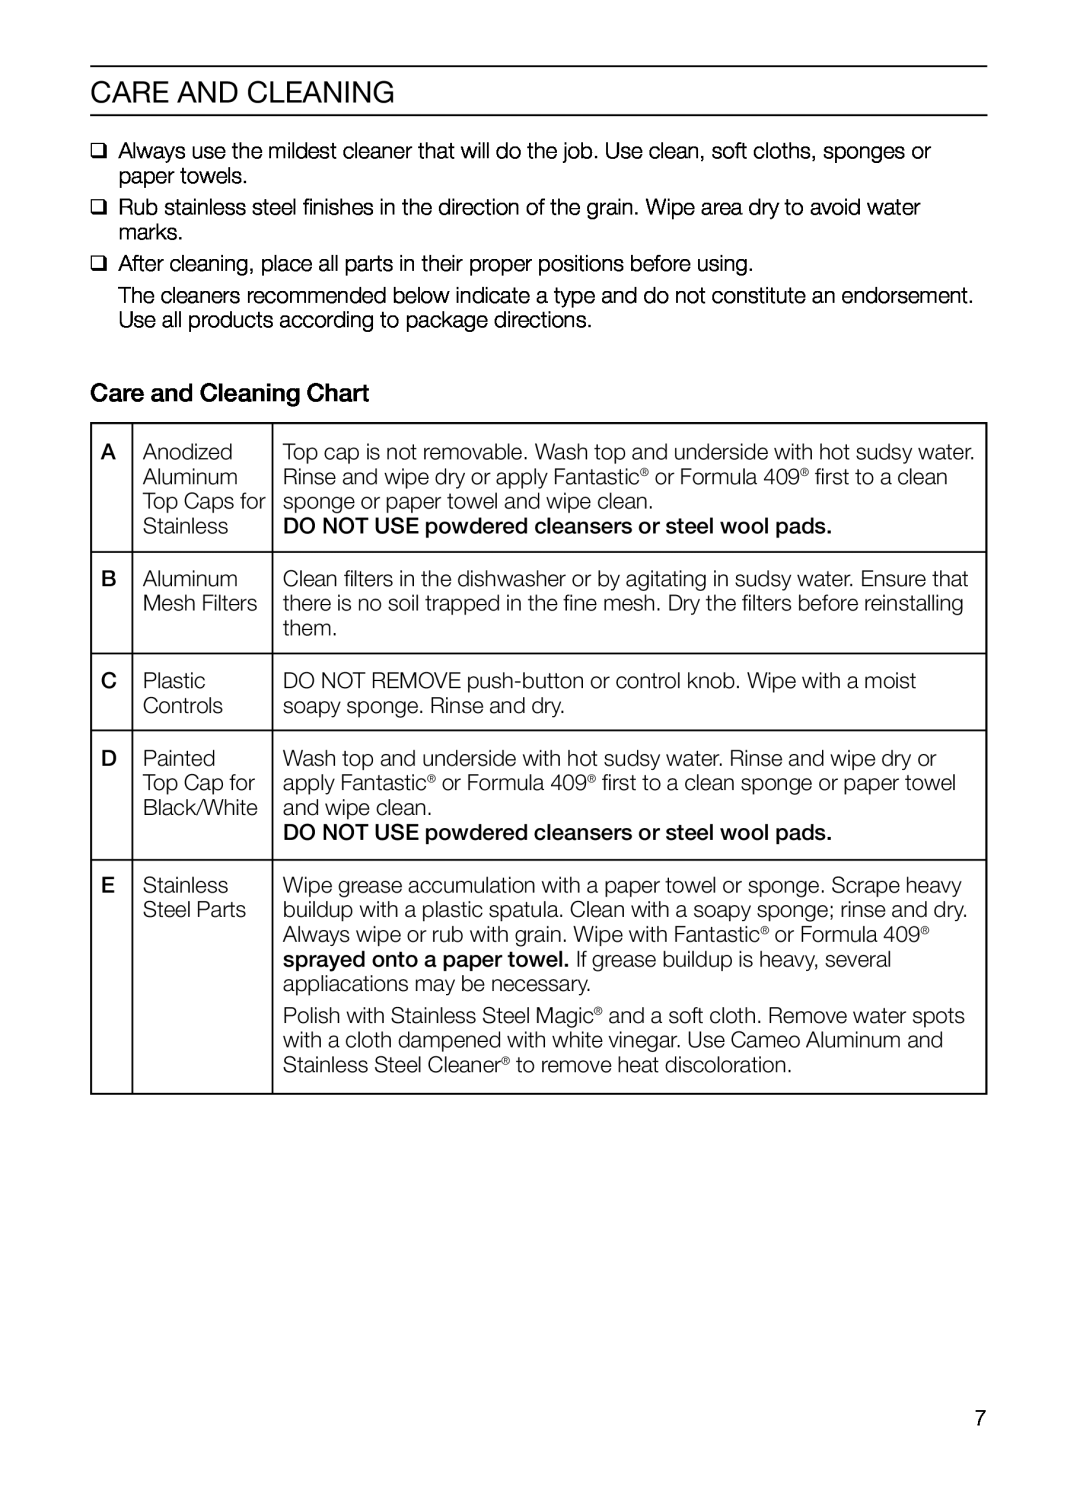 Bosch Appliances DHD Series manual Care and Cleaning Chart, Care And Cleaning 